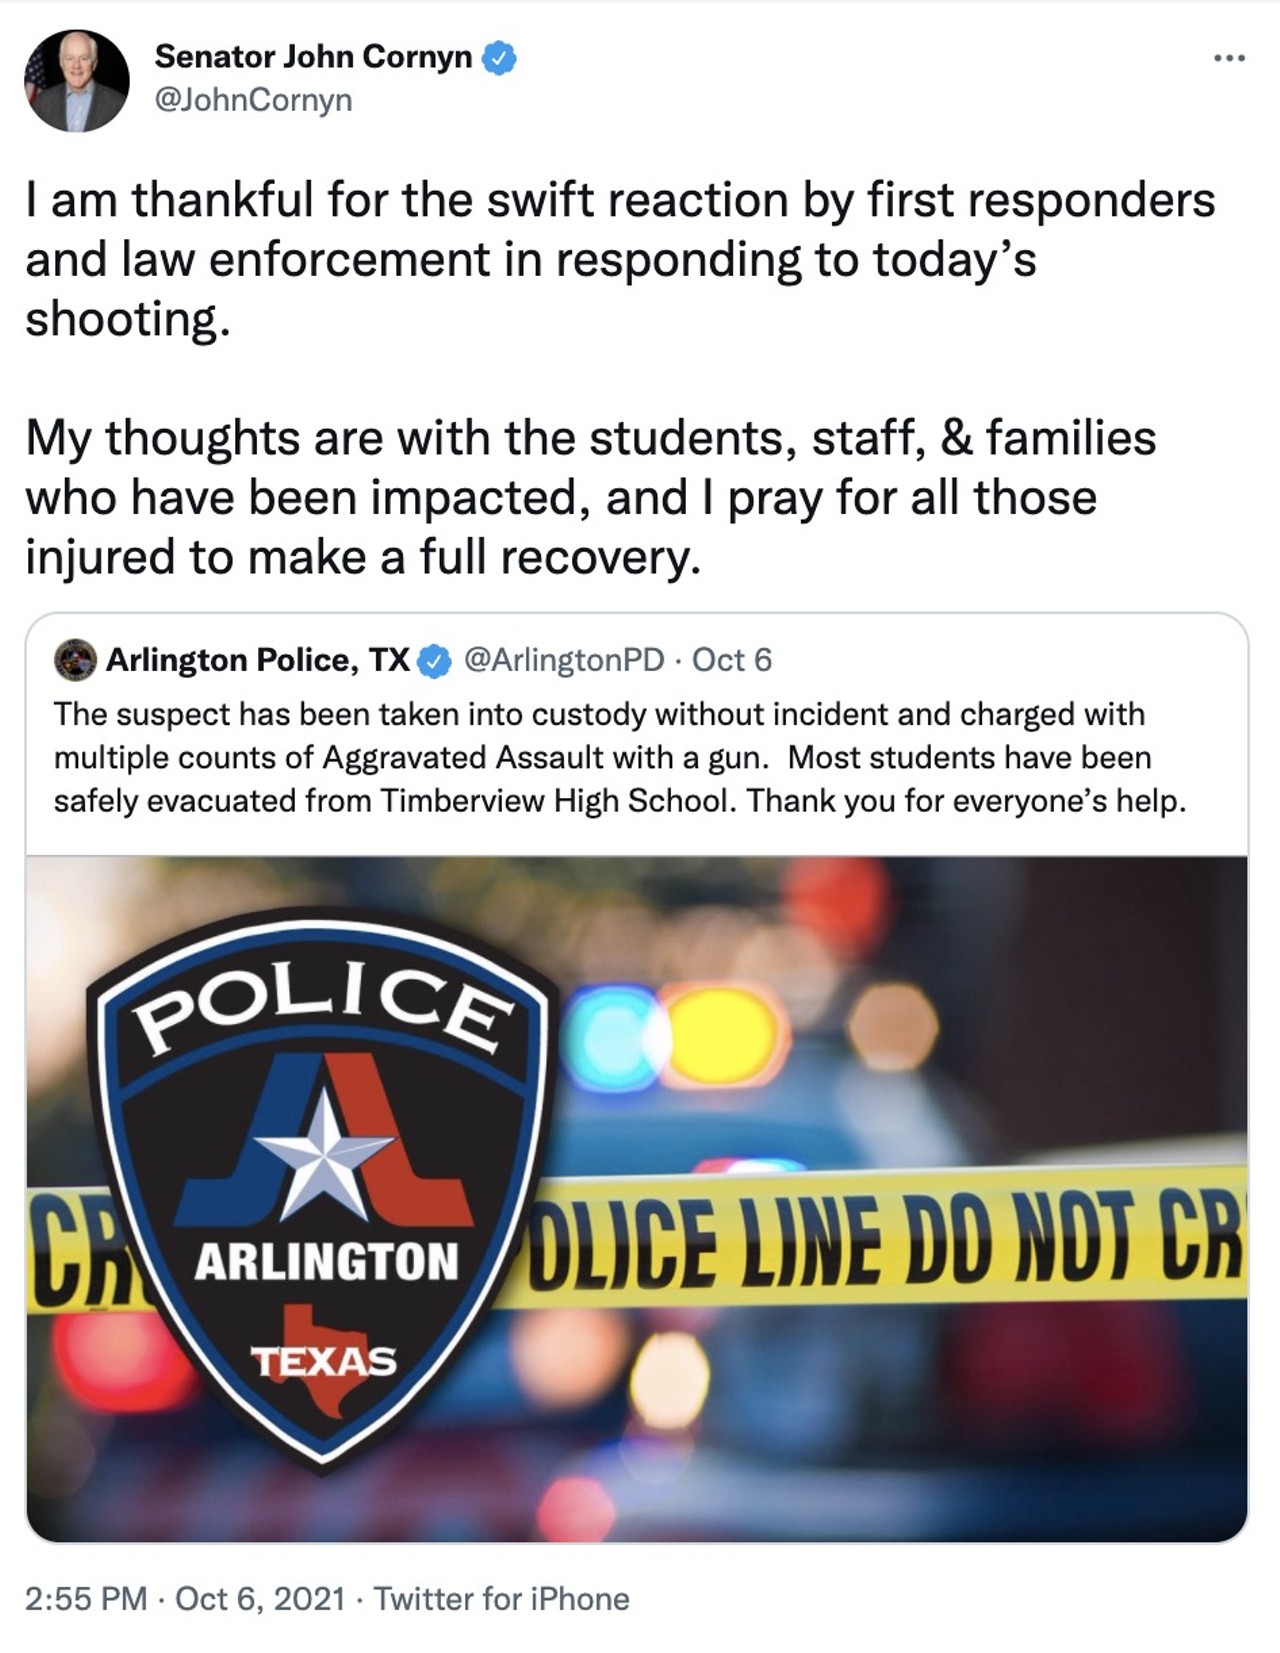 Thoughts and Prayers
Here's a couple's costume idea: Put on your best business attire and go as Texas Republican politicians tweeting after a school shooting. One partner can wear a sign around their neck reading "Thoughts" and the other can wear "Prayers."
Photo via Twitter / JohnCornyn